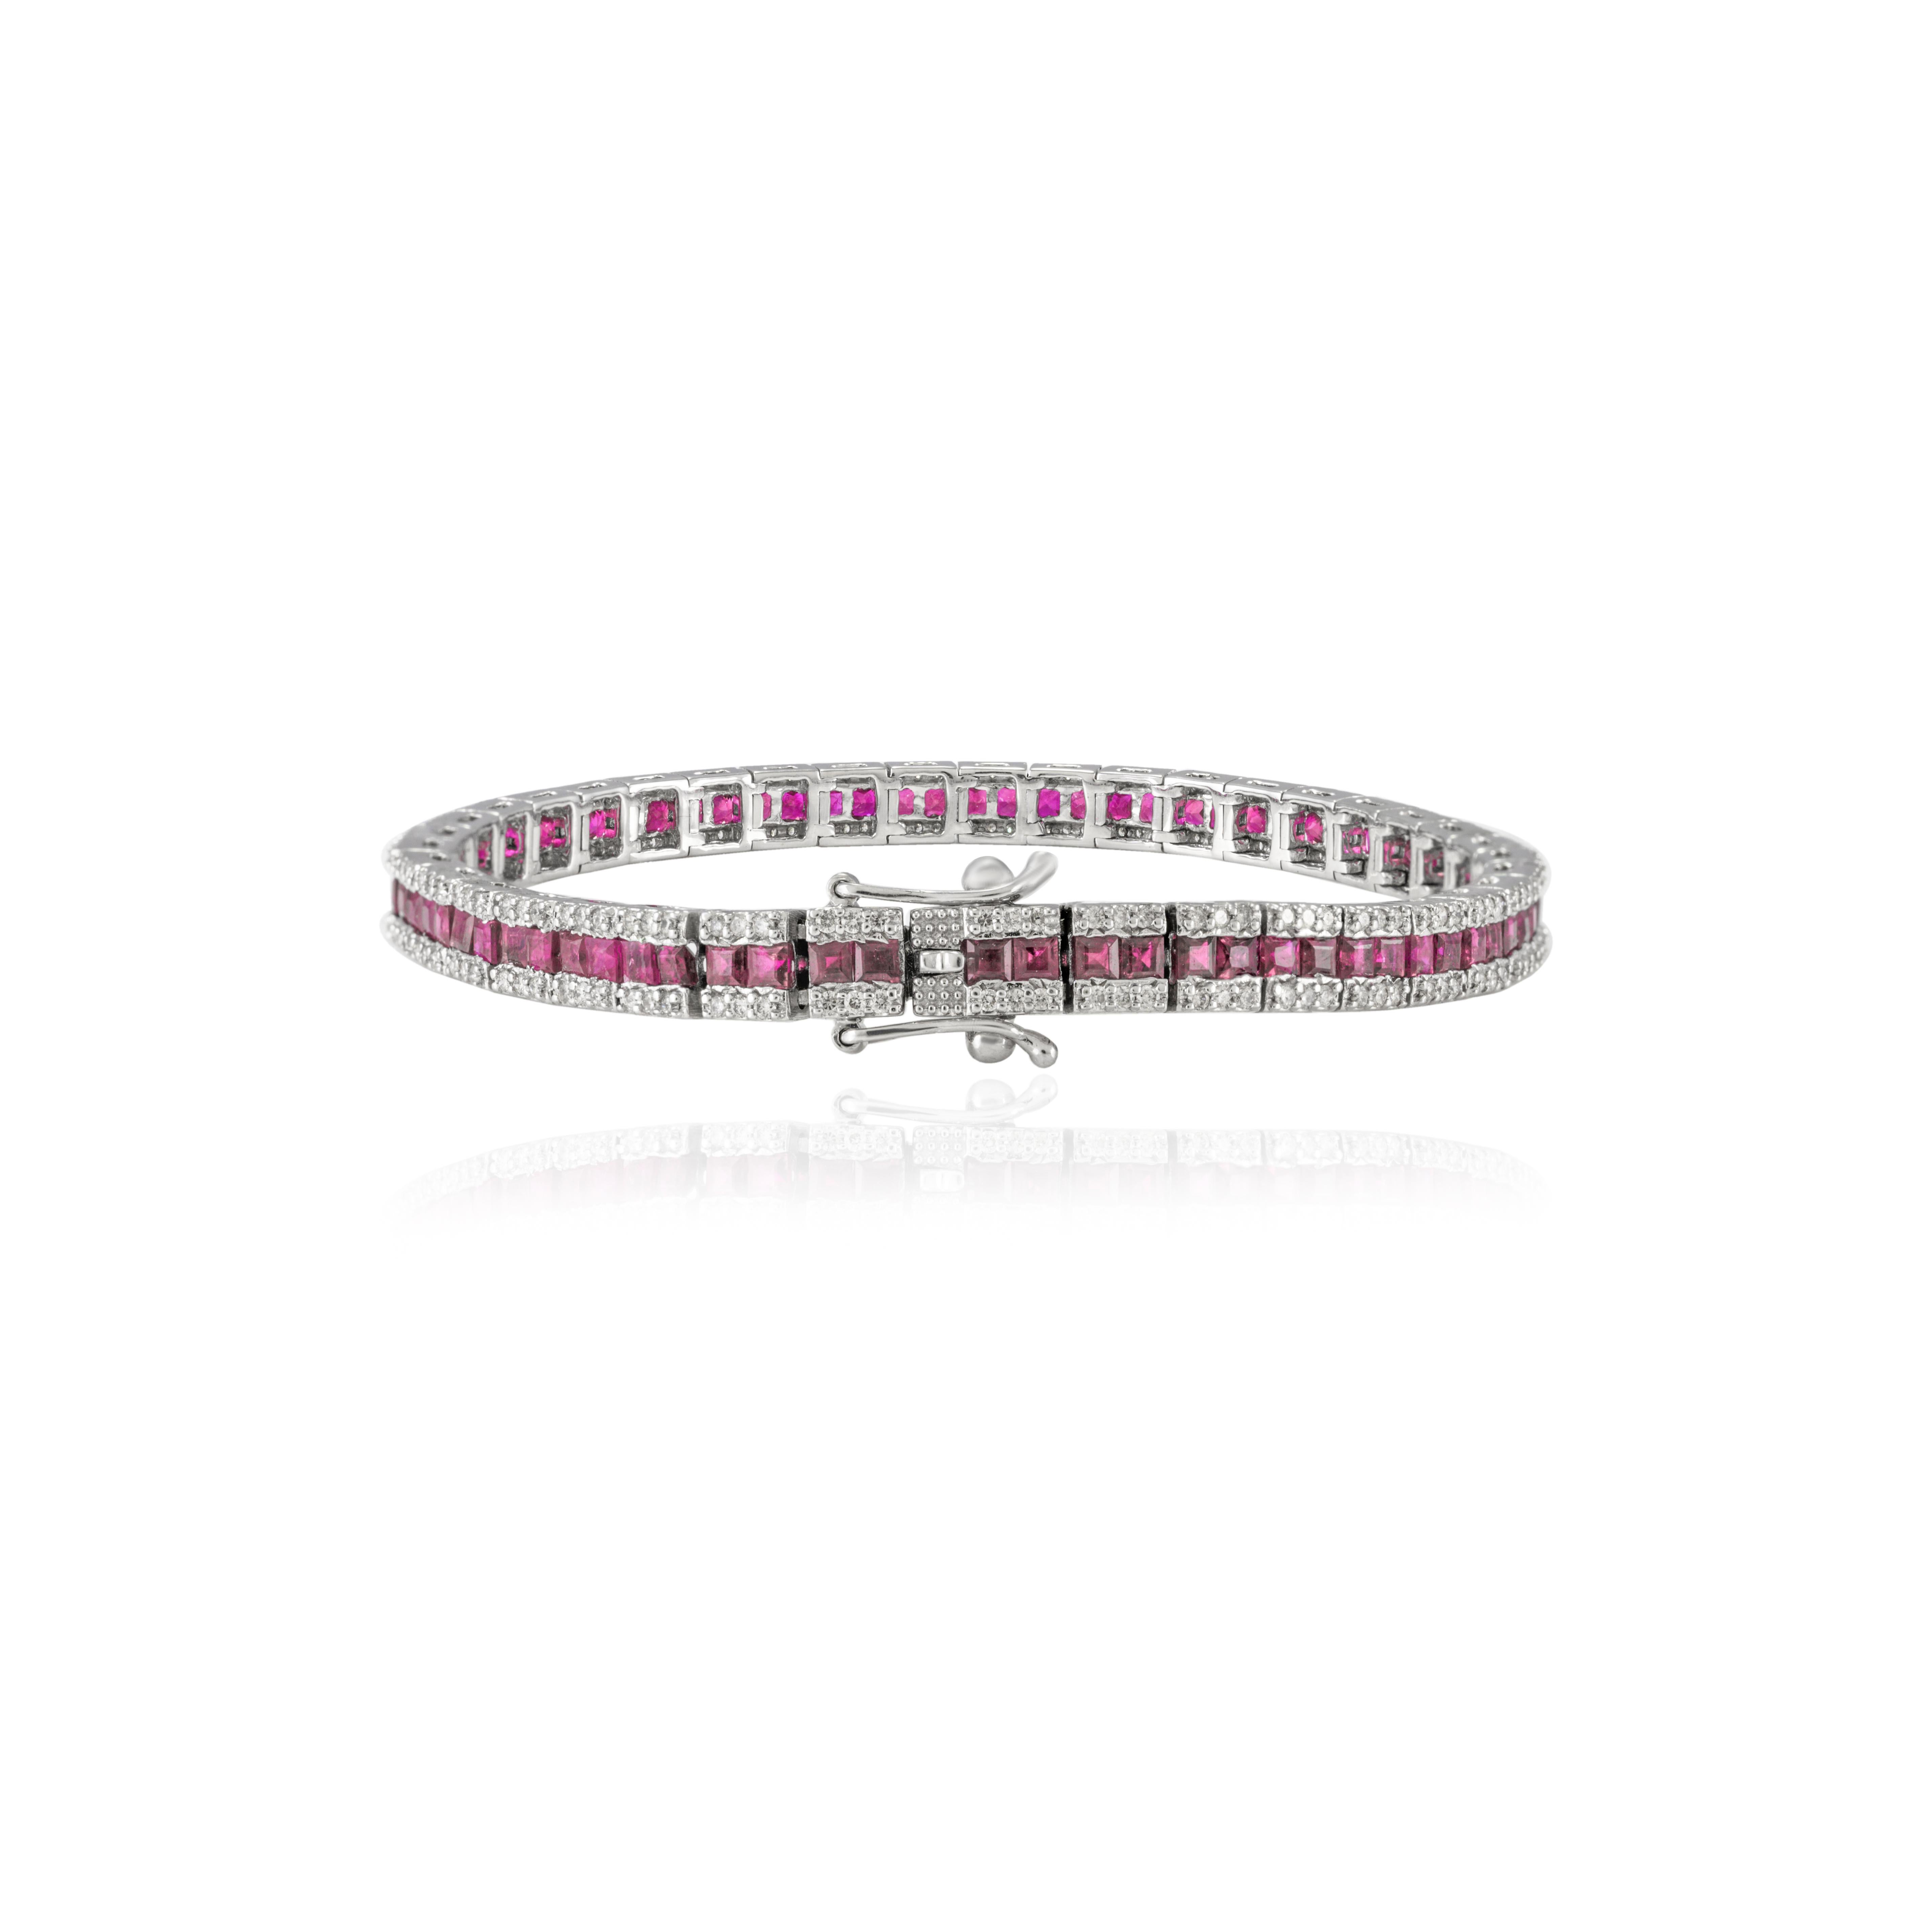 This Art Deco Style Ruby and Diamond Wedding Tennis Bracelet in 18K gold showcases 6.41 carats endlessly sparkling natural ruby and diamonds. It measures 7 inches long in length. 
Ruby improves mental strength. 
Designed with perfect square cut ruby